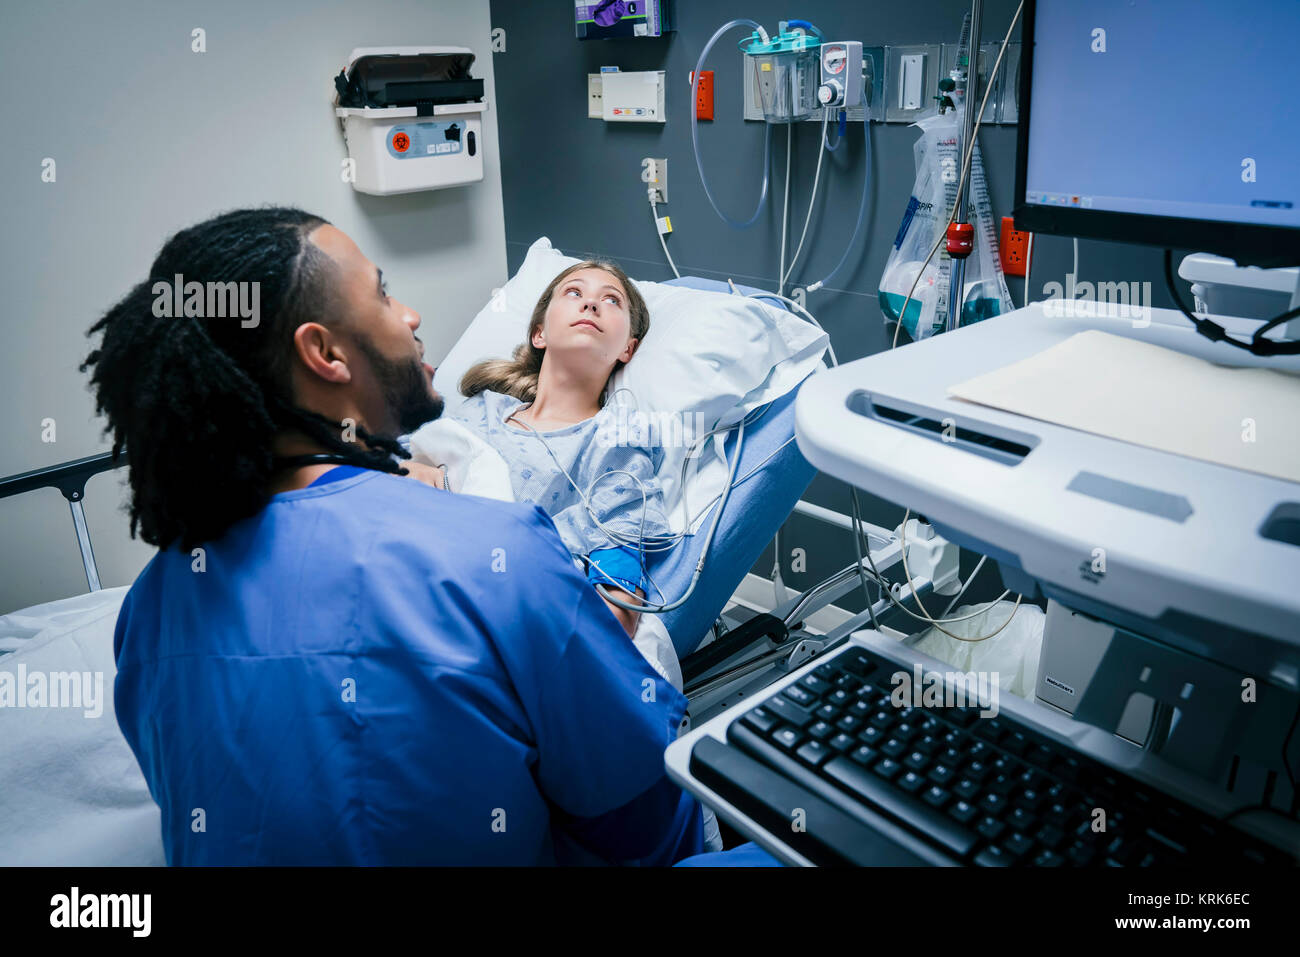 Nurse and patient looking at monitor in hospital Stock Photo